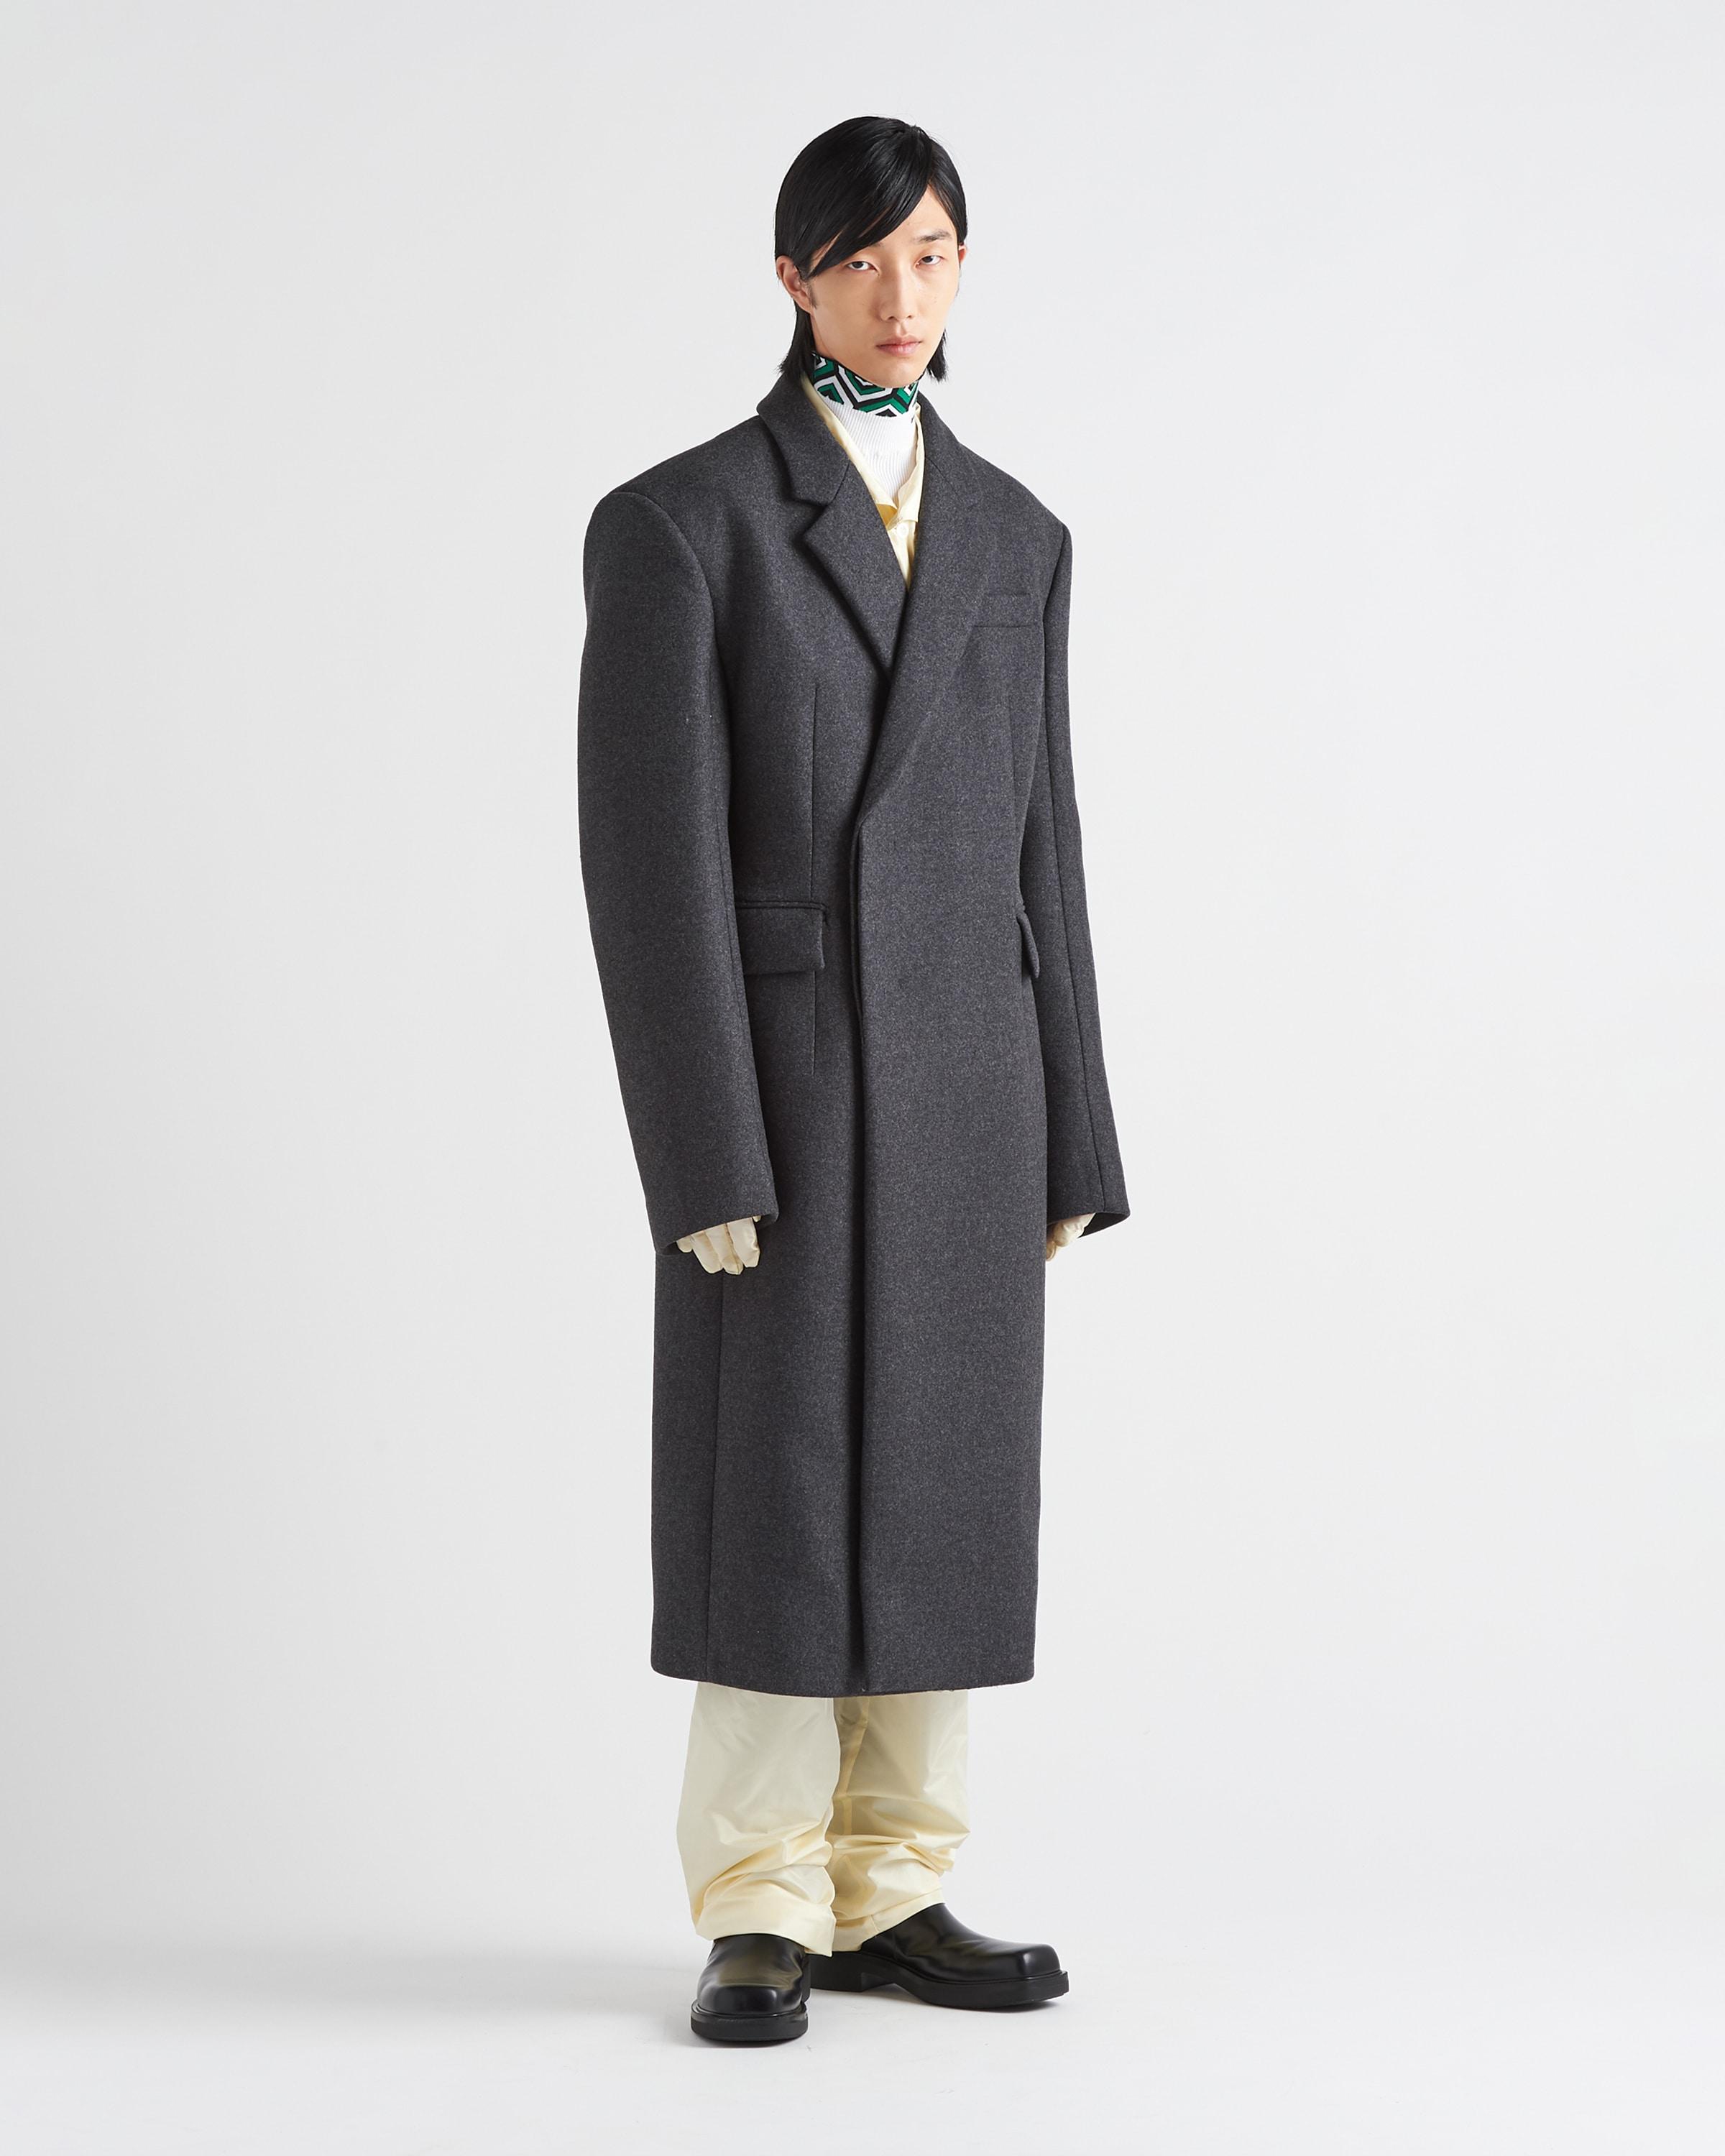 Prada Double-breasted Wool Coat in Gray for Men | Lyst